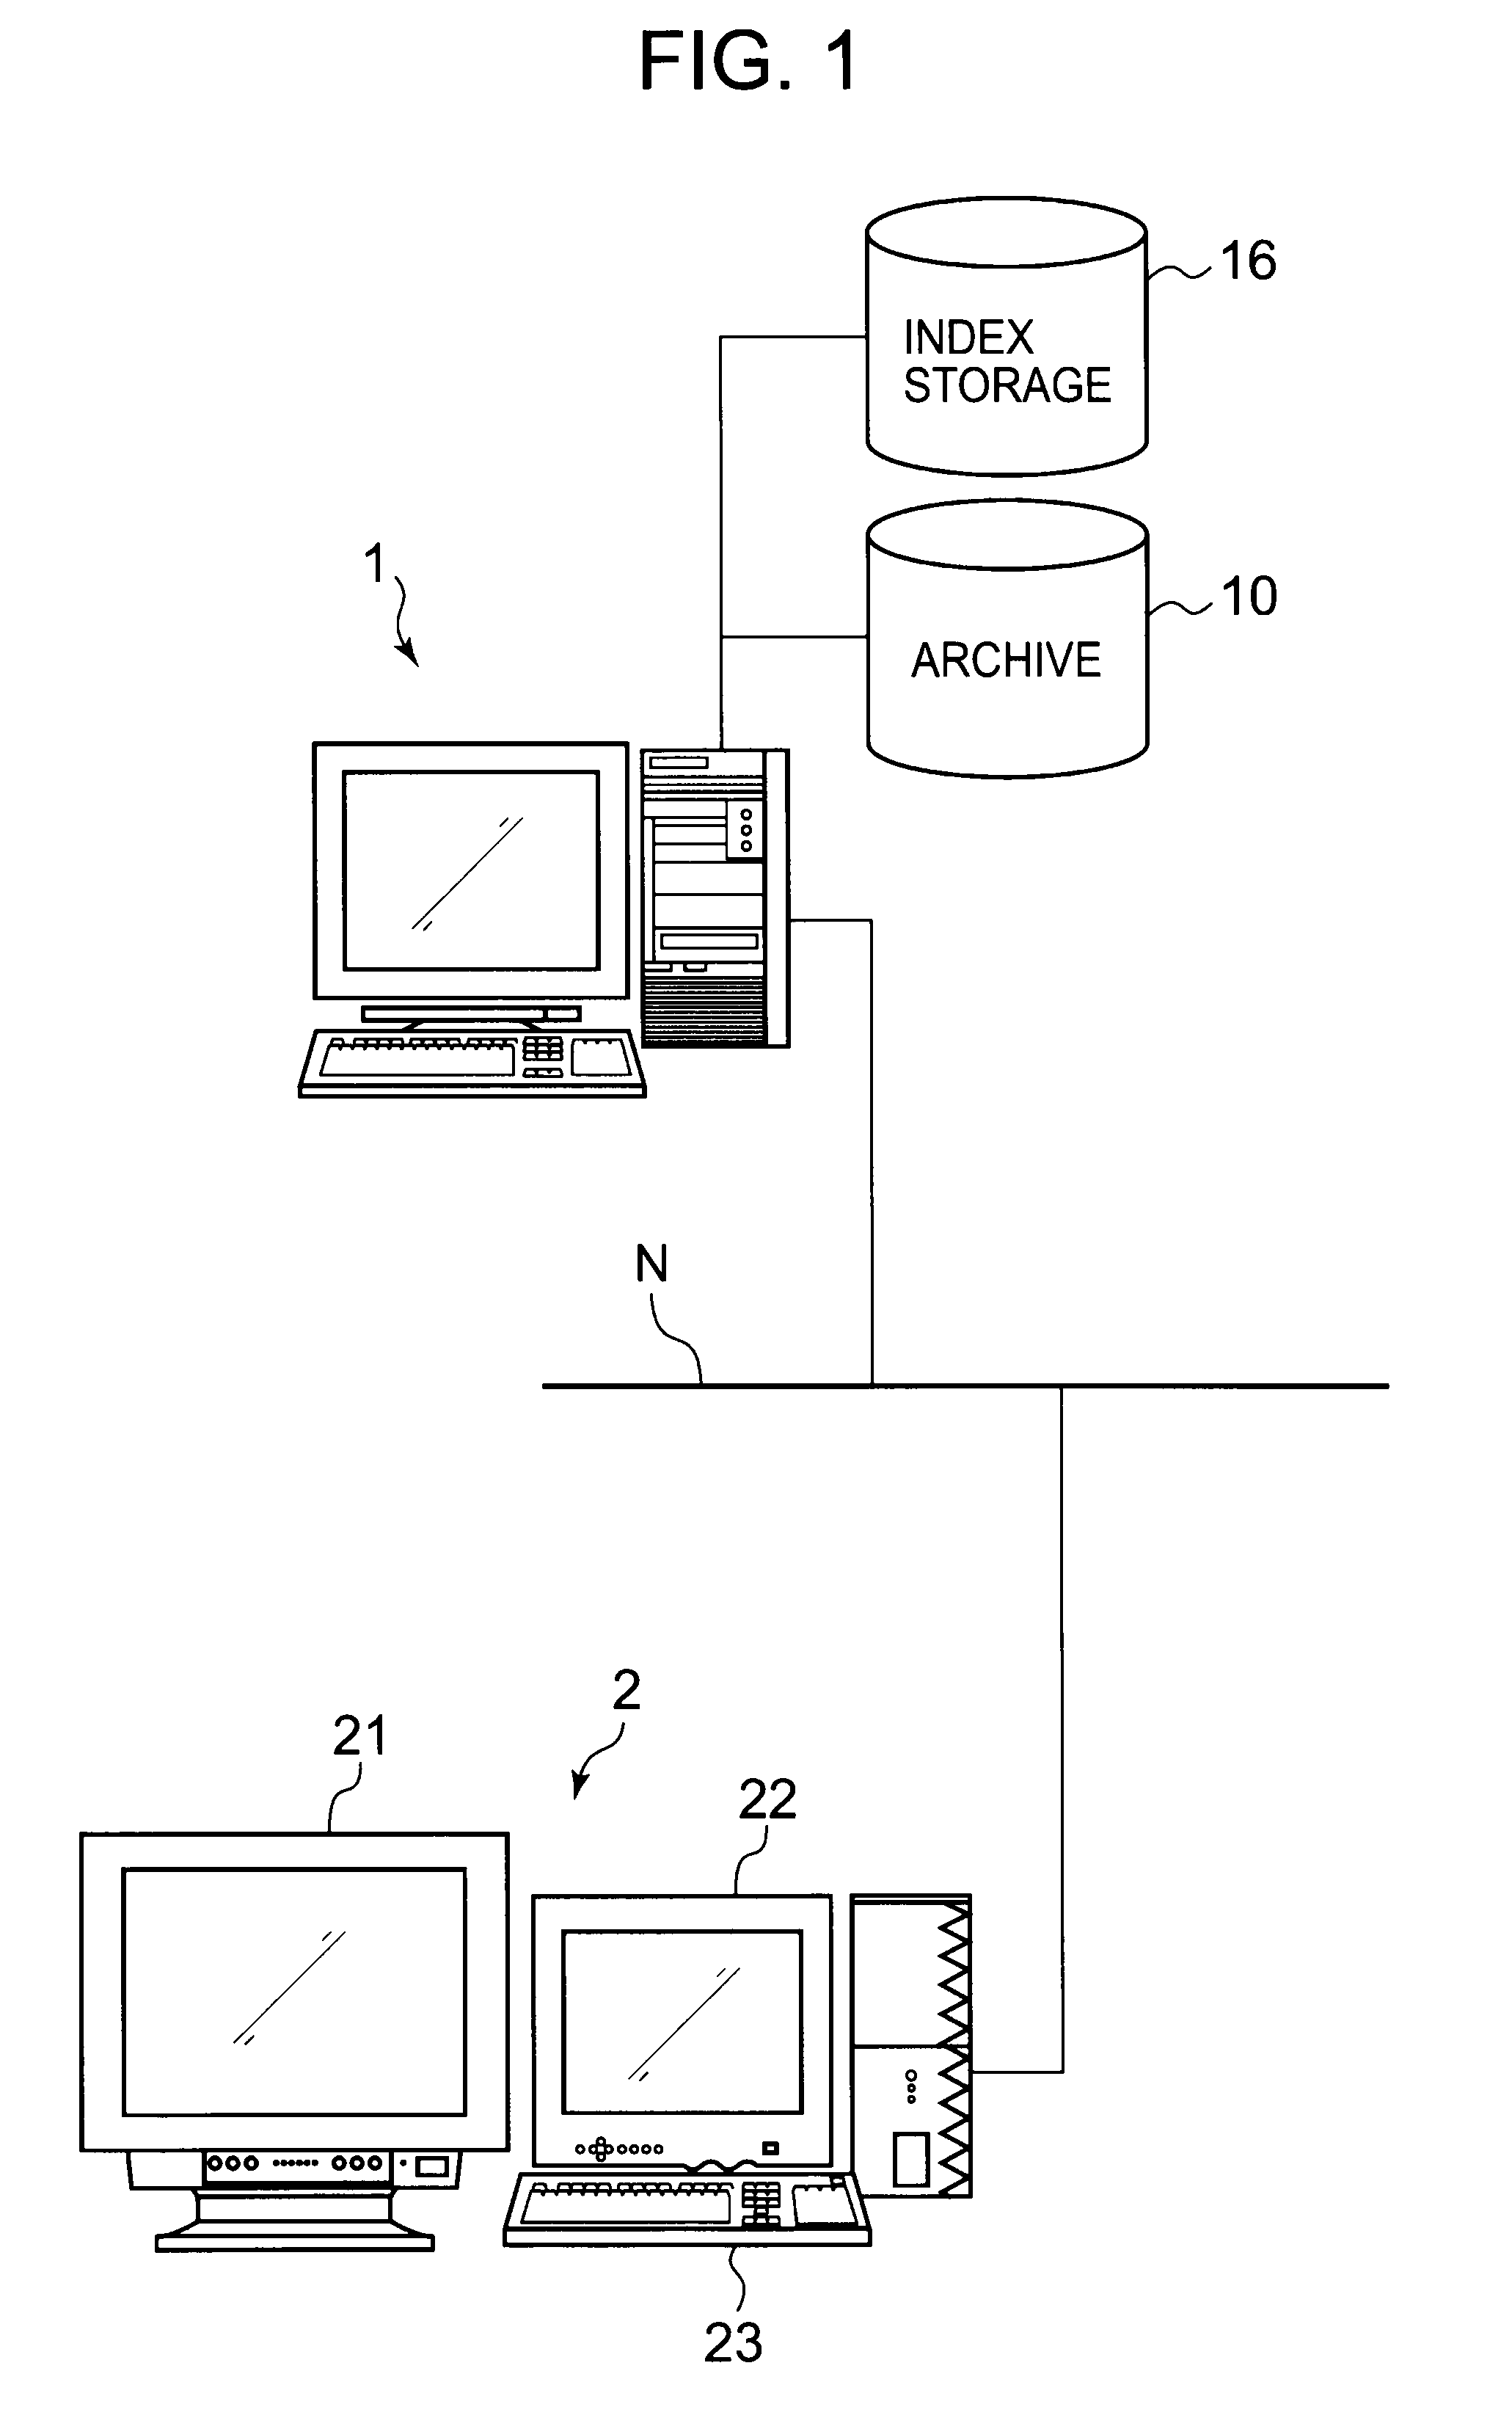 Report searching apparatus and a method for searching a report